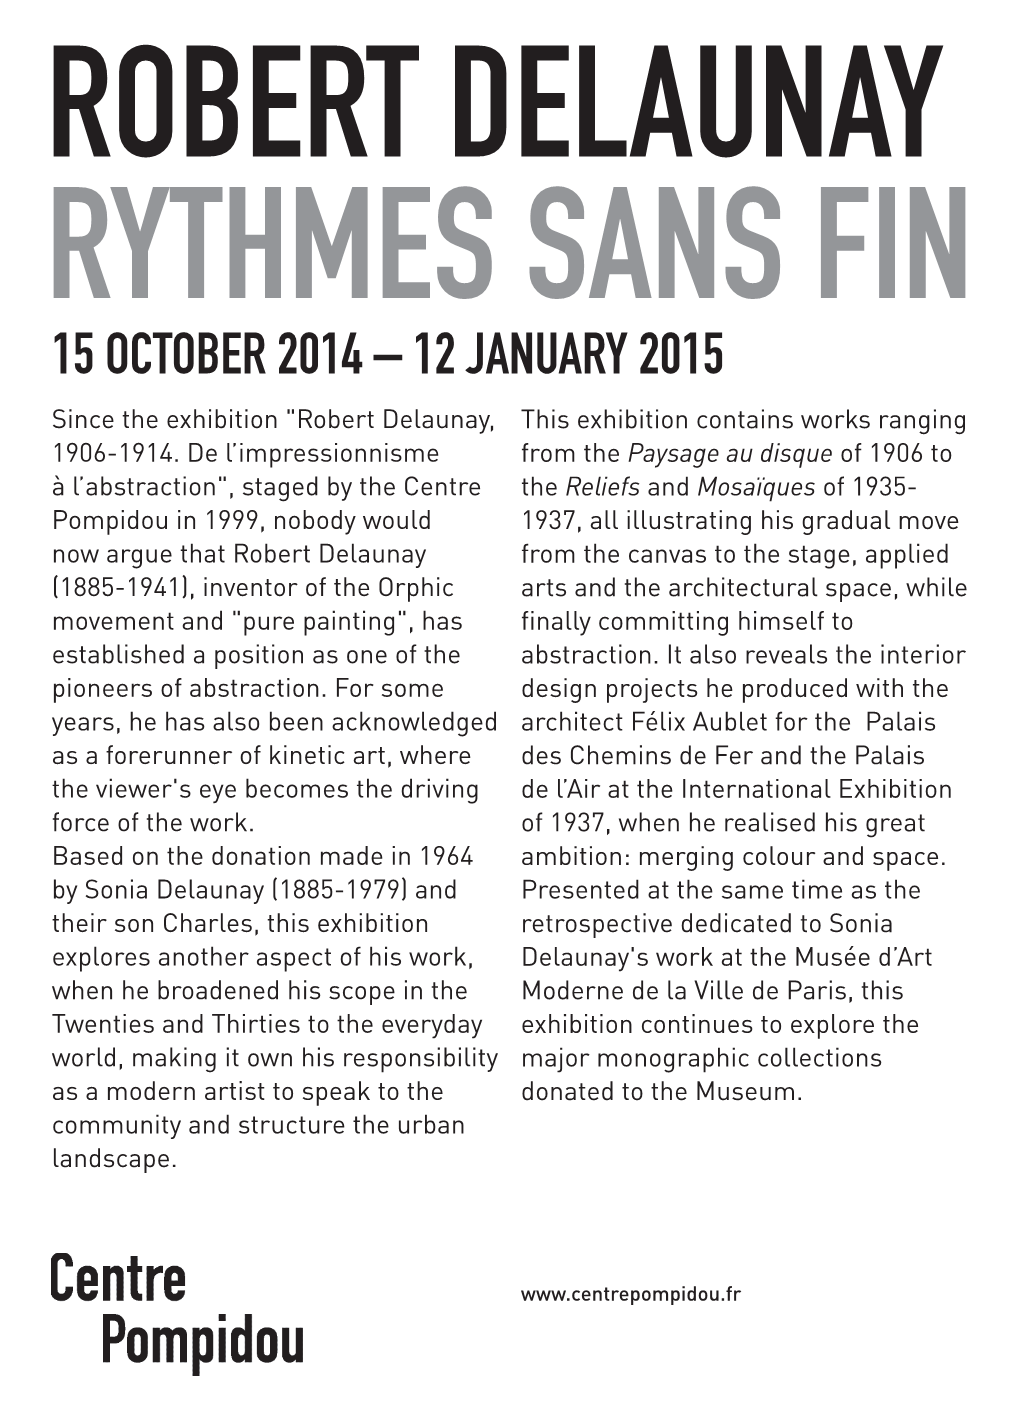 Robert Delaunay Rythmes Sans Fin 15 October 2014 – 12 January 2015 Since the Exhibition "Robert Delaunay, This Exhibition Contains Works Ranging 1906-1914